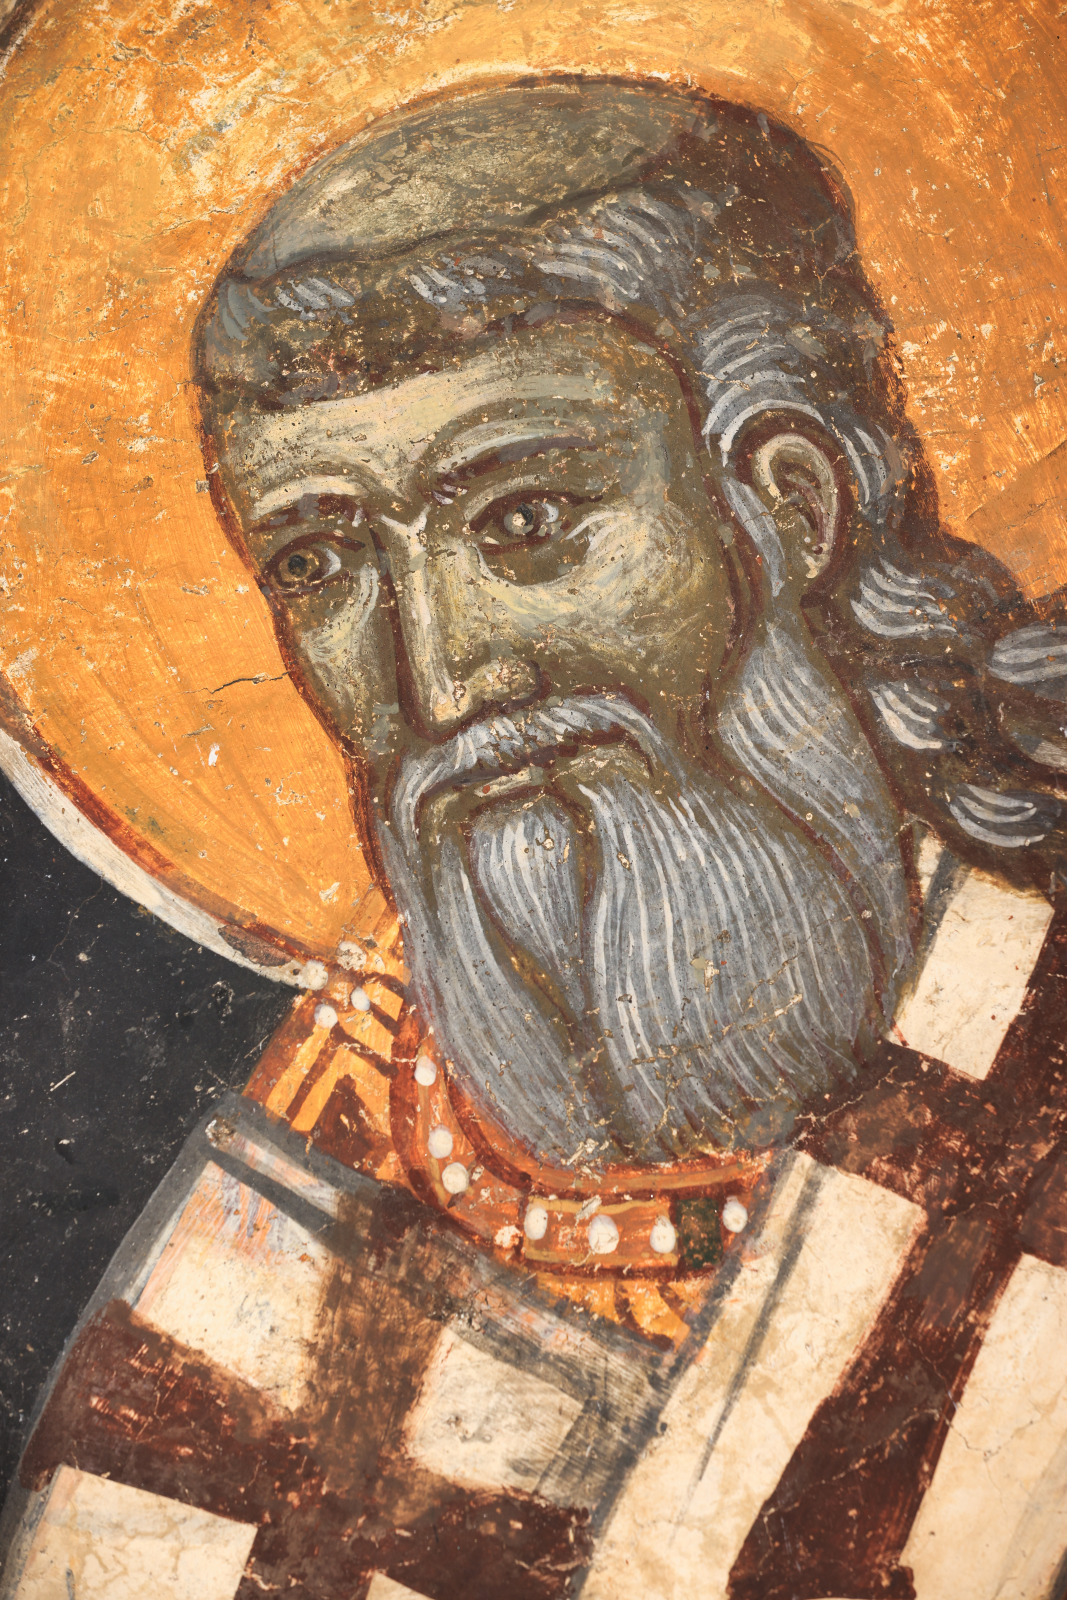 Serbian Patriarch Makarije as the founder, detail